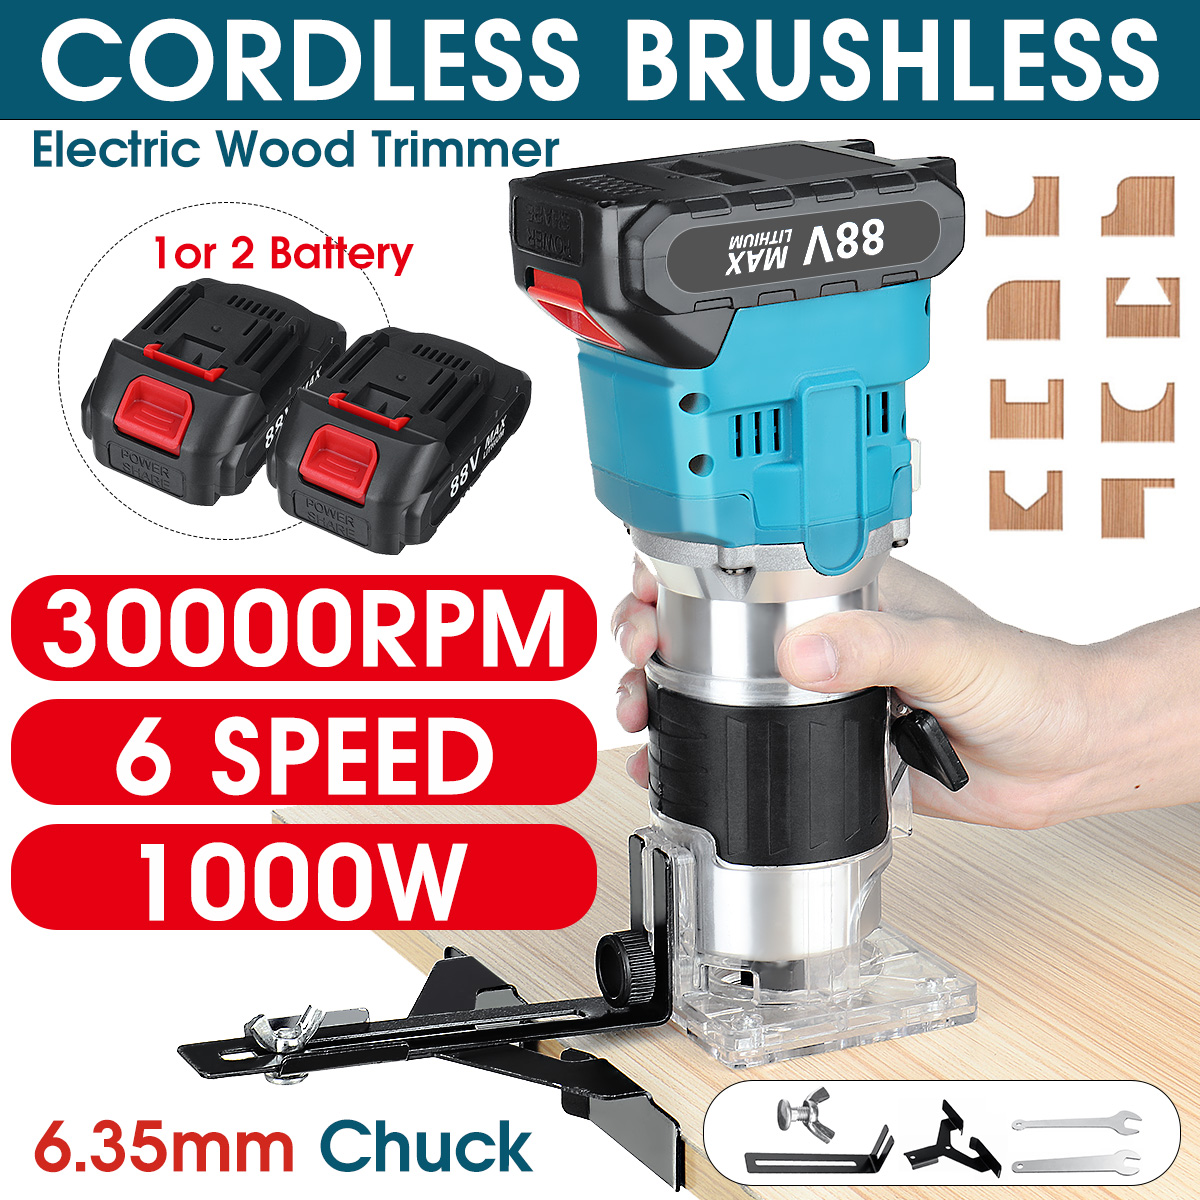 30000rpm-1000W-Cordless-Brushless-Electric-Trimmer-6-Speeds-Wood-Trimmer-Router-W-12pcs-Battery-1856249-1